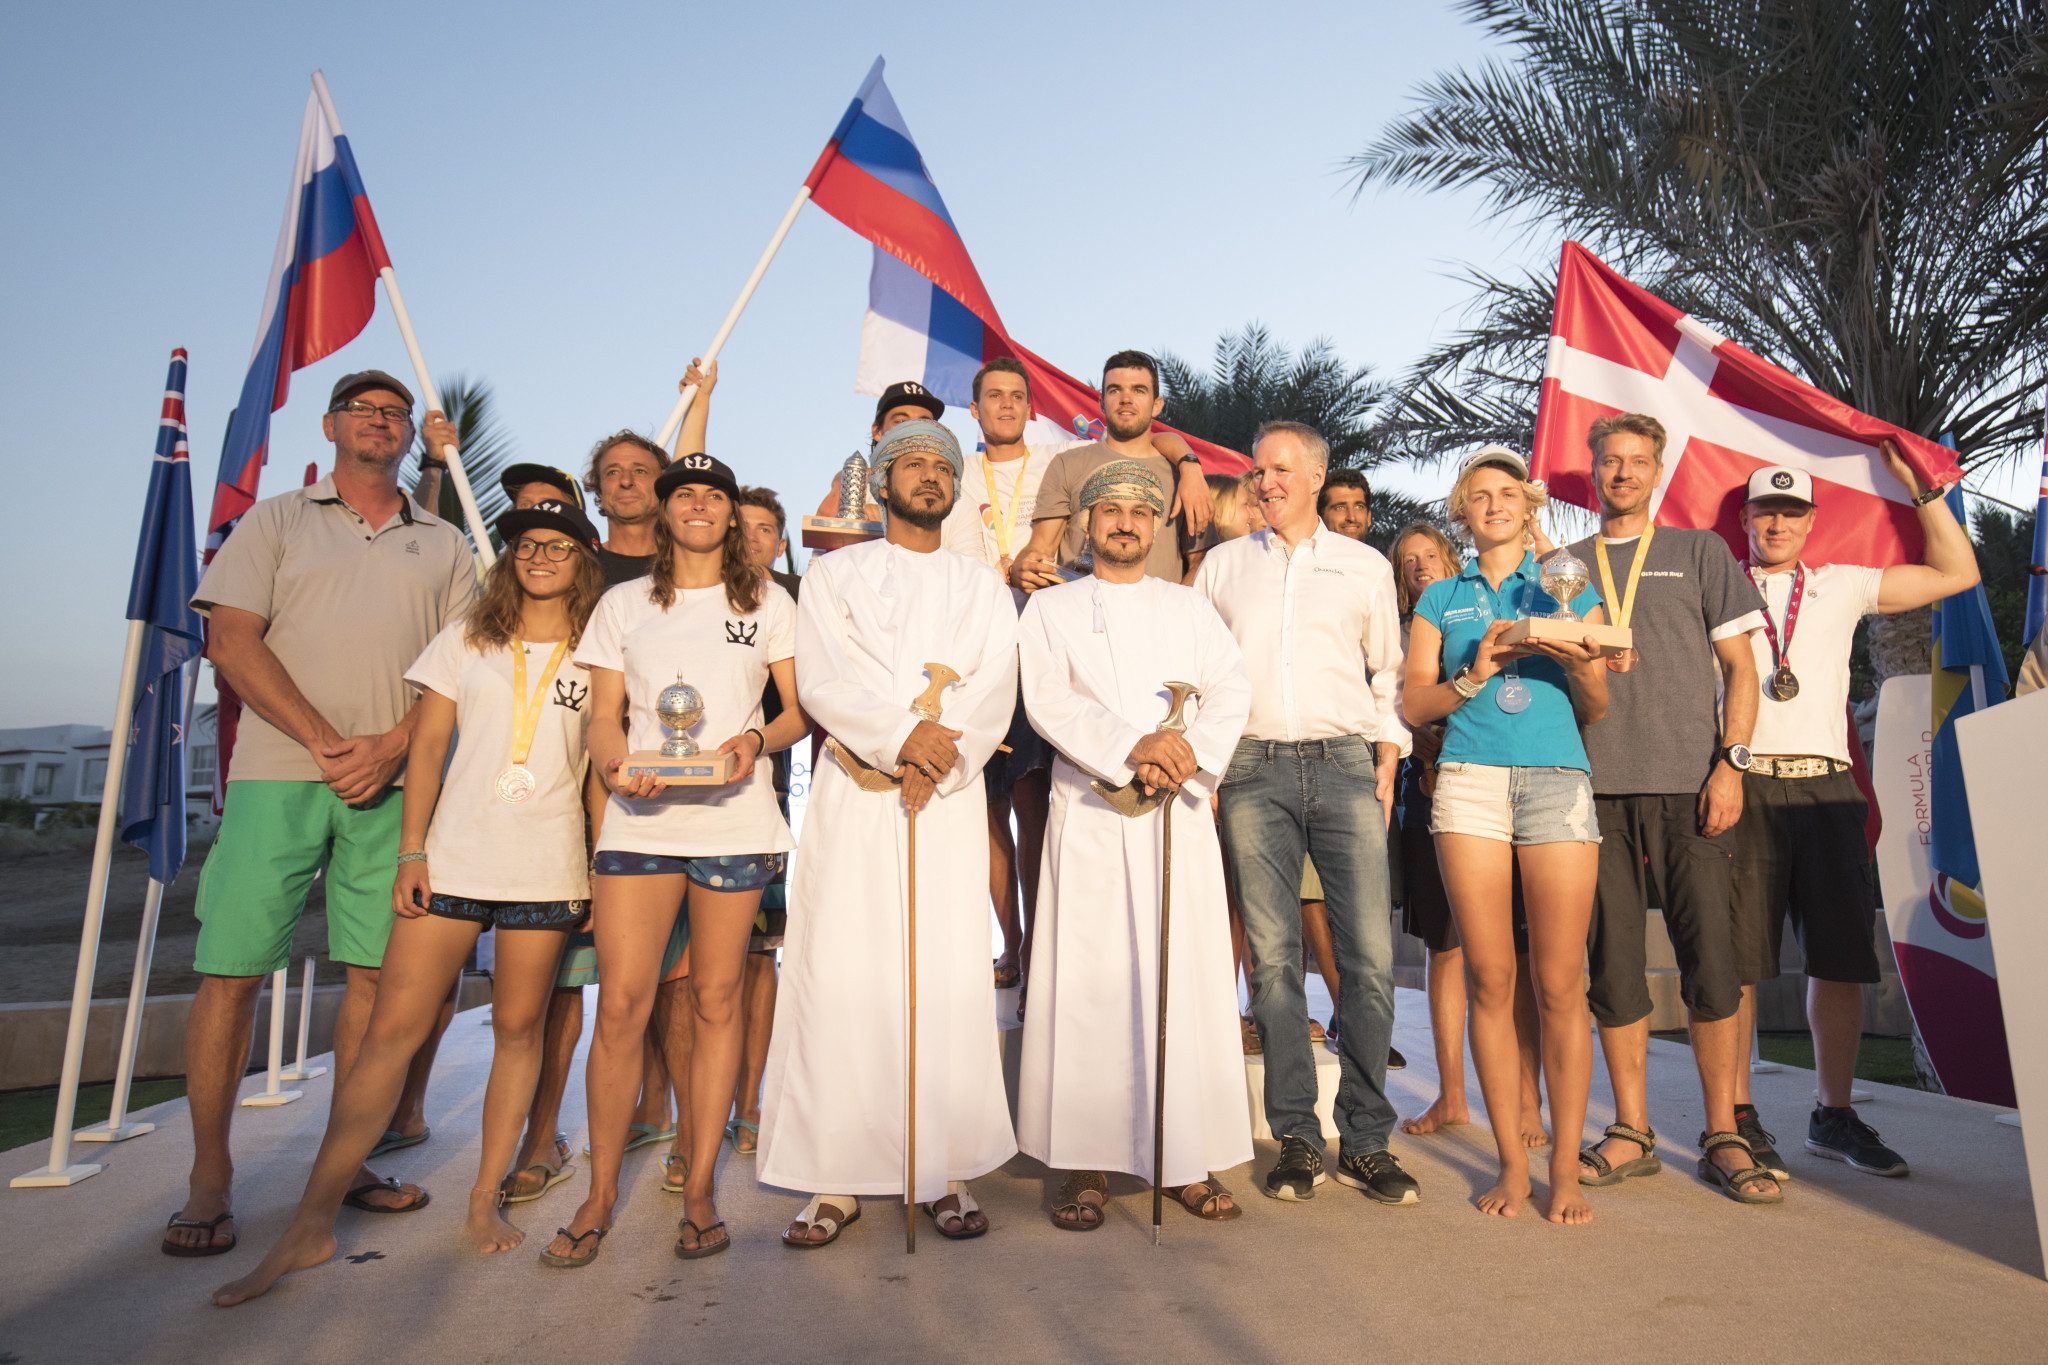 Riders from 22 different countries and six continents came to the event in Oman ©IKA Formula Kite World Championship